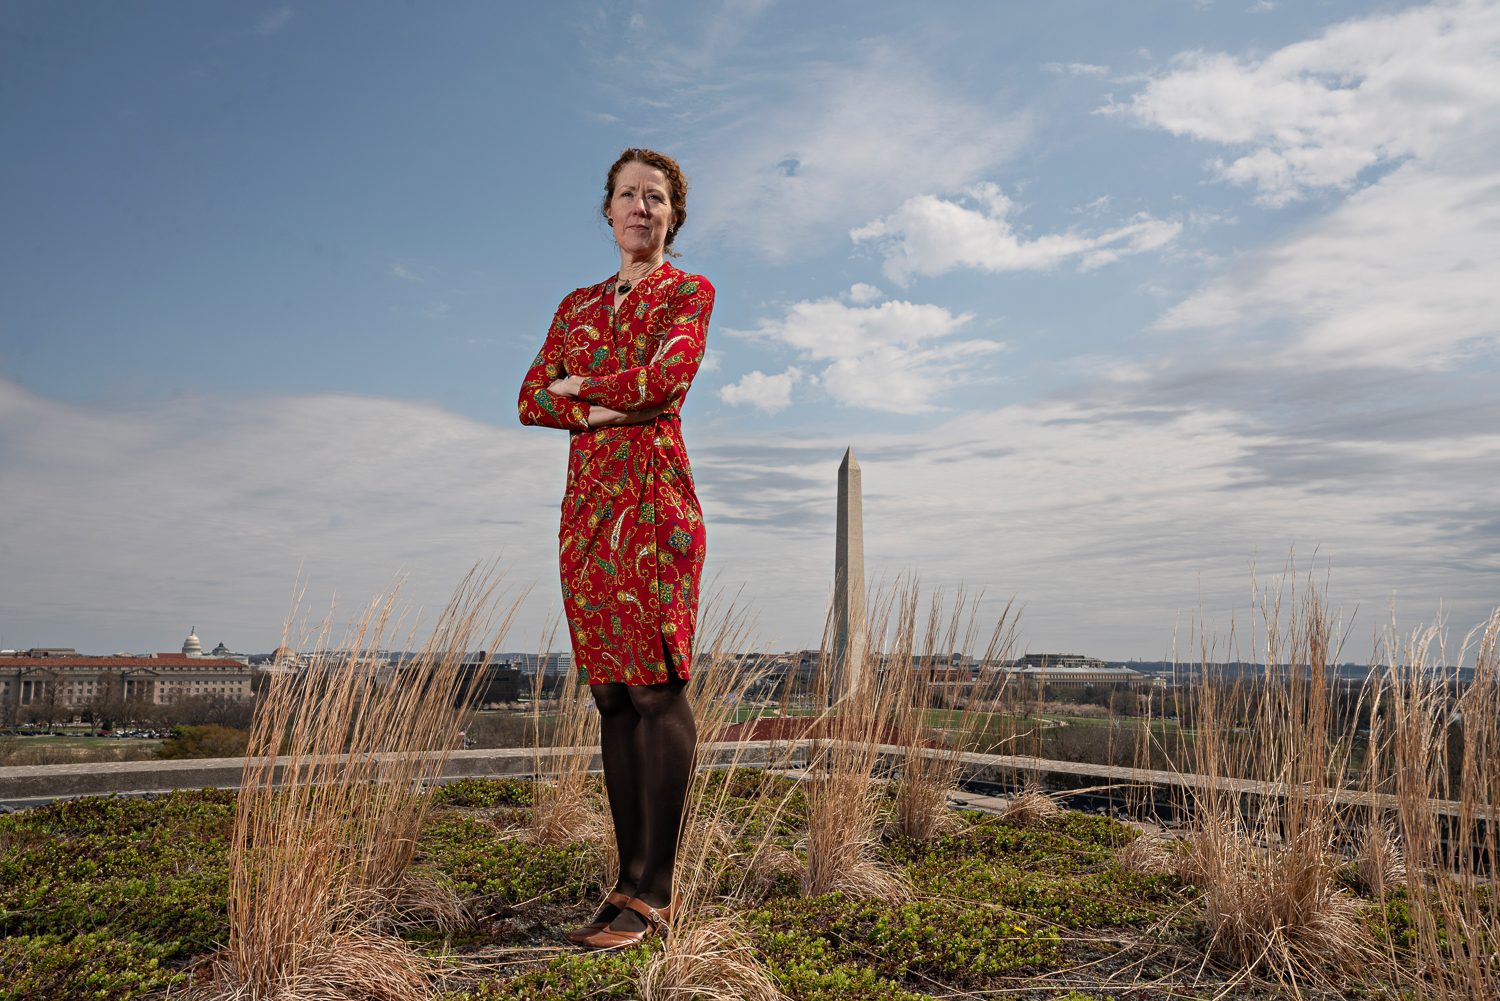 Tracy Stone-Manning is the new director of the Bureau of Land Management, sworn in by Deb Haaland in October 2021. Stone-Manning stands on the turf roof of the U.S. Department of the Interior headquarters in Washington, D.C.